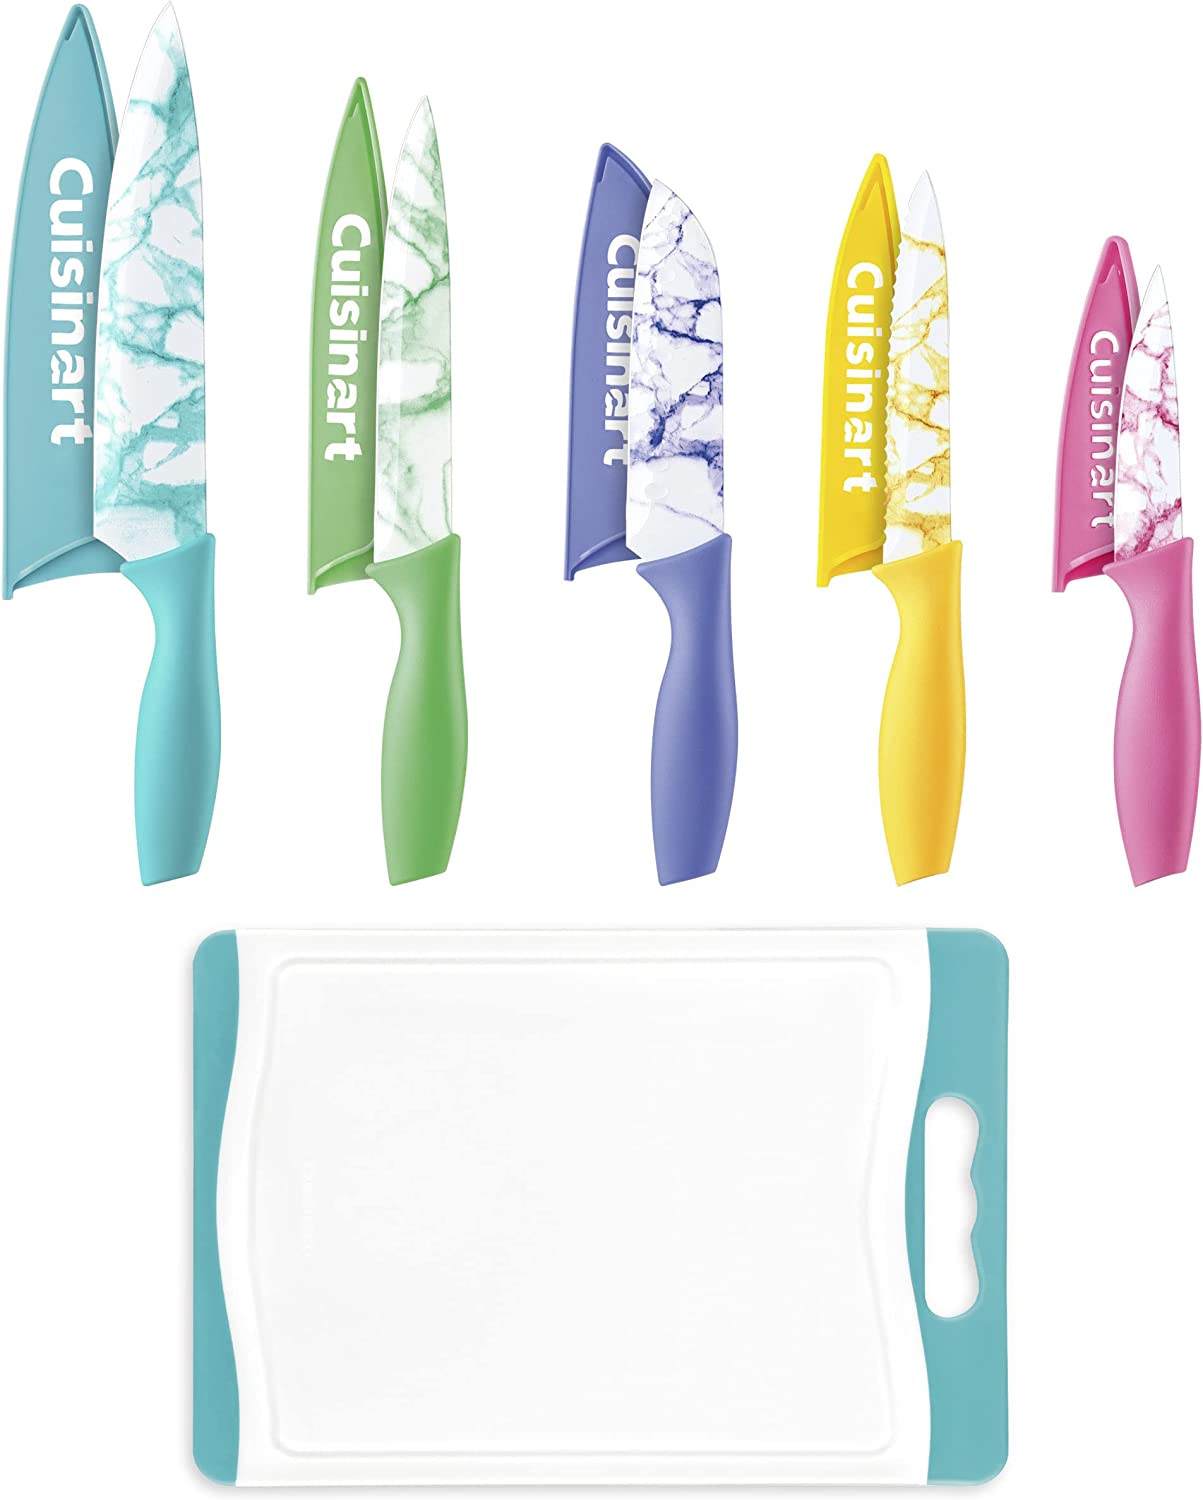 11-Pc Cuisinart Advantage Marble Cutlery Set w/ Blade Guards & Cutting Board (C55CB-11PM, Multicolor) $10.86 + Free Shipping w/ Prime or on $25+